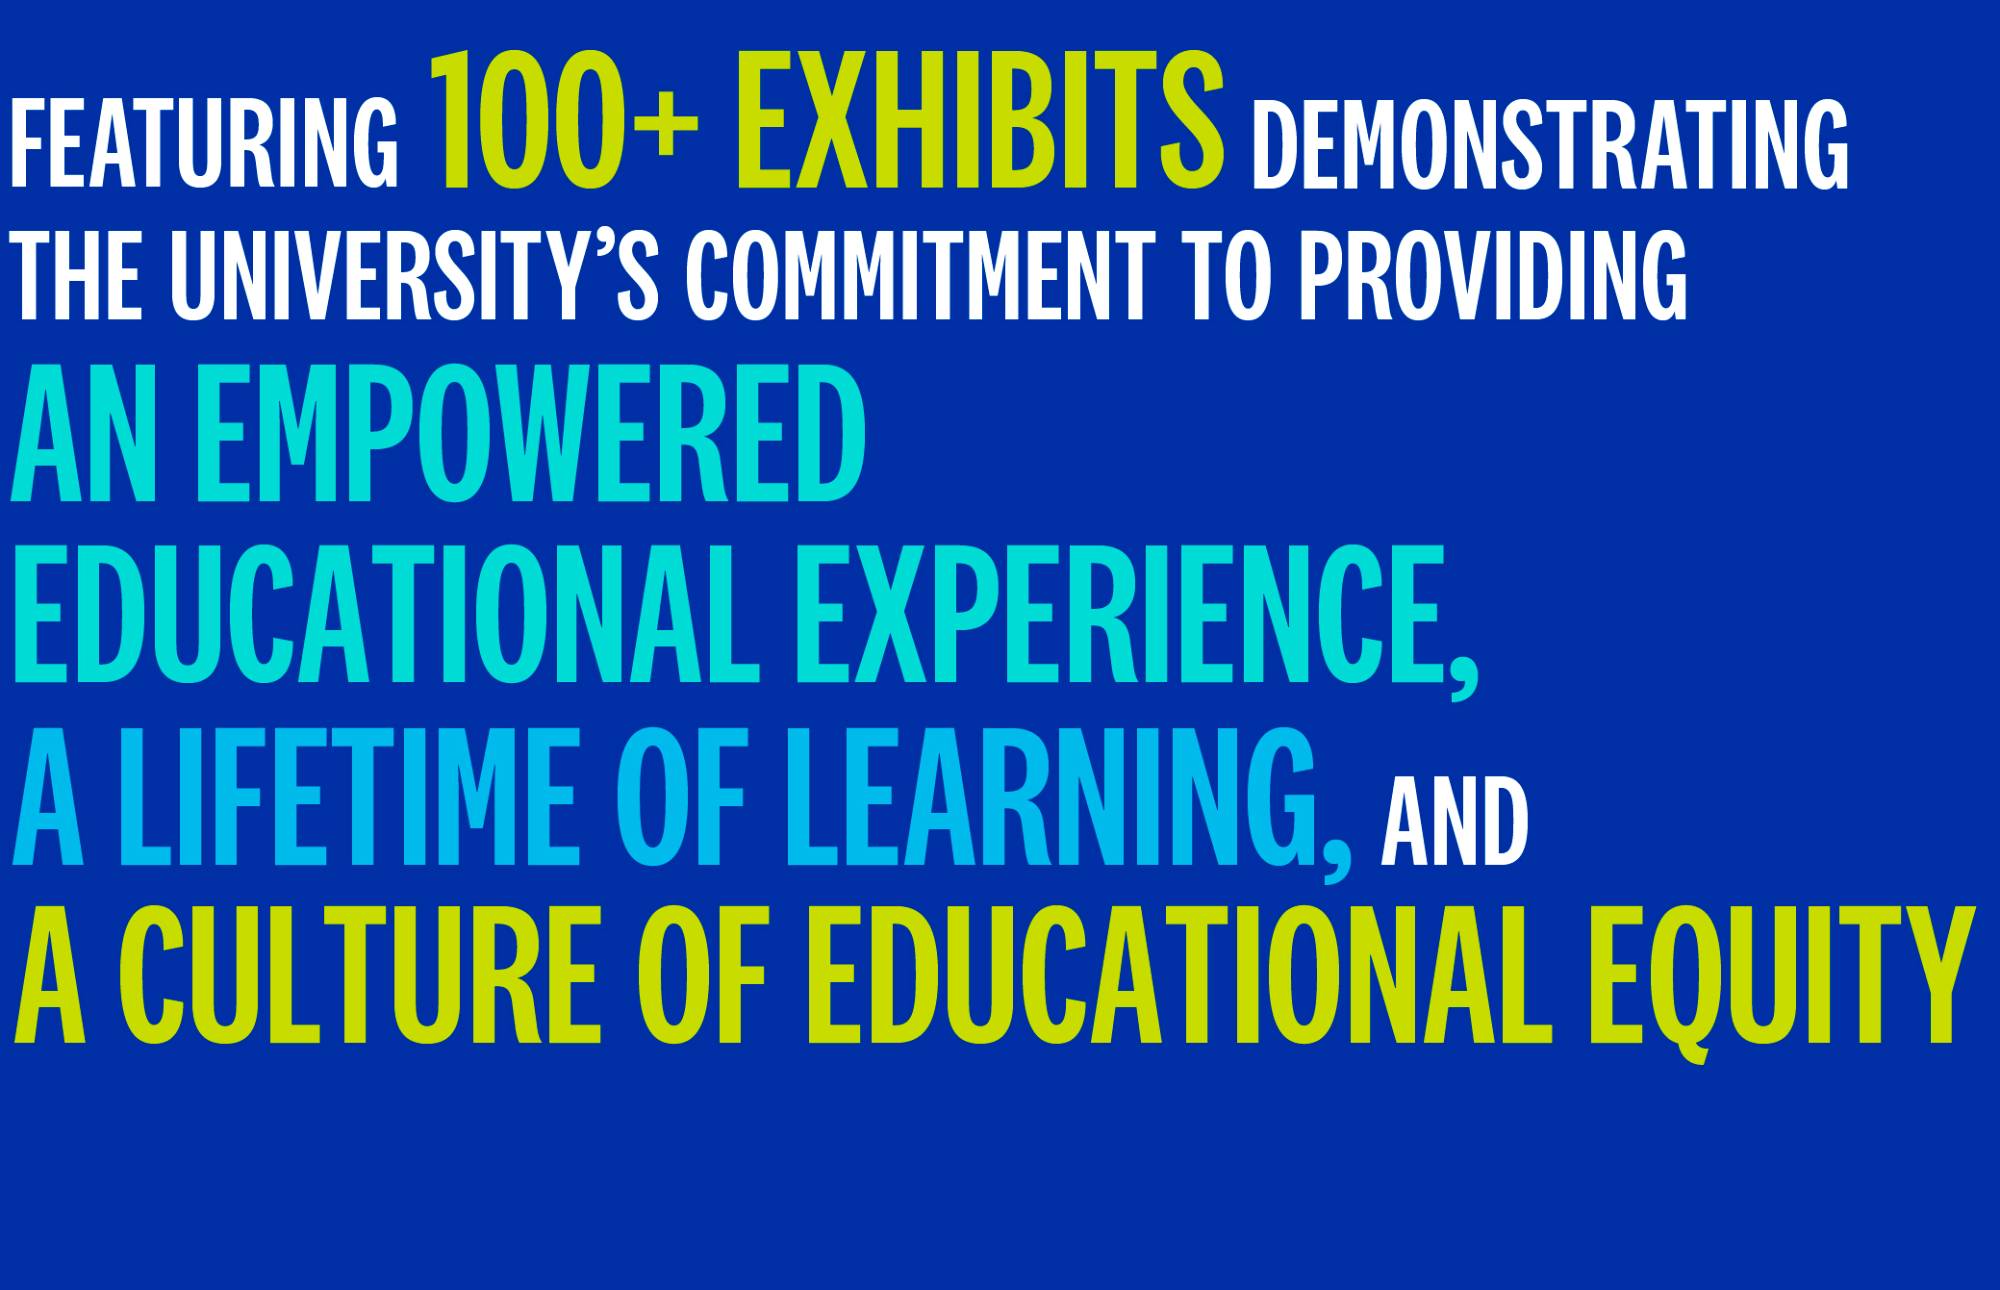 Featuring 100+ exhibits demonstrating the university's commitment to providing an empowered educational experience, a lifetime of learning, and a culture of educational equity